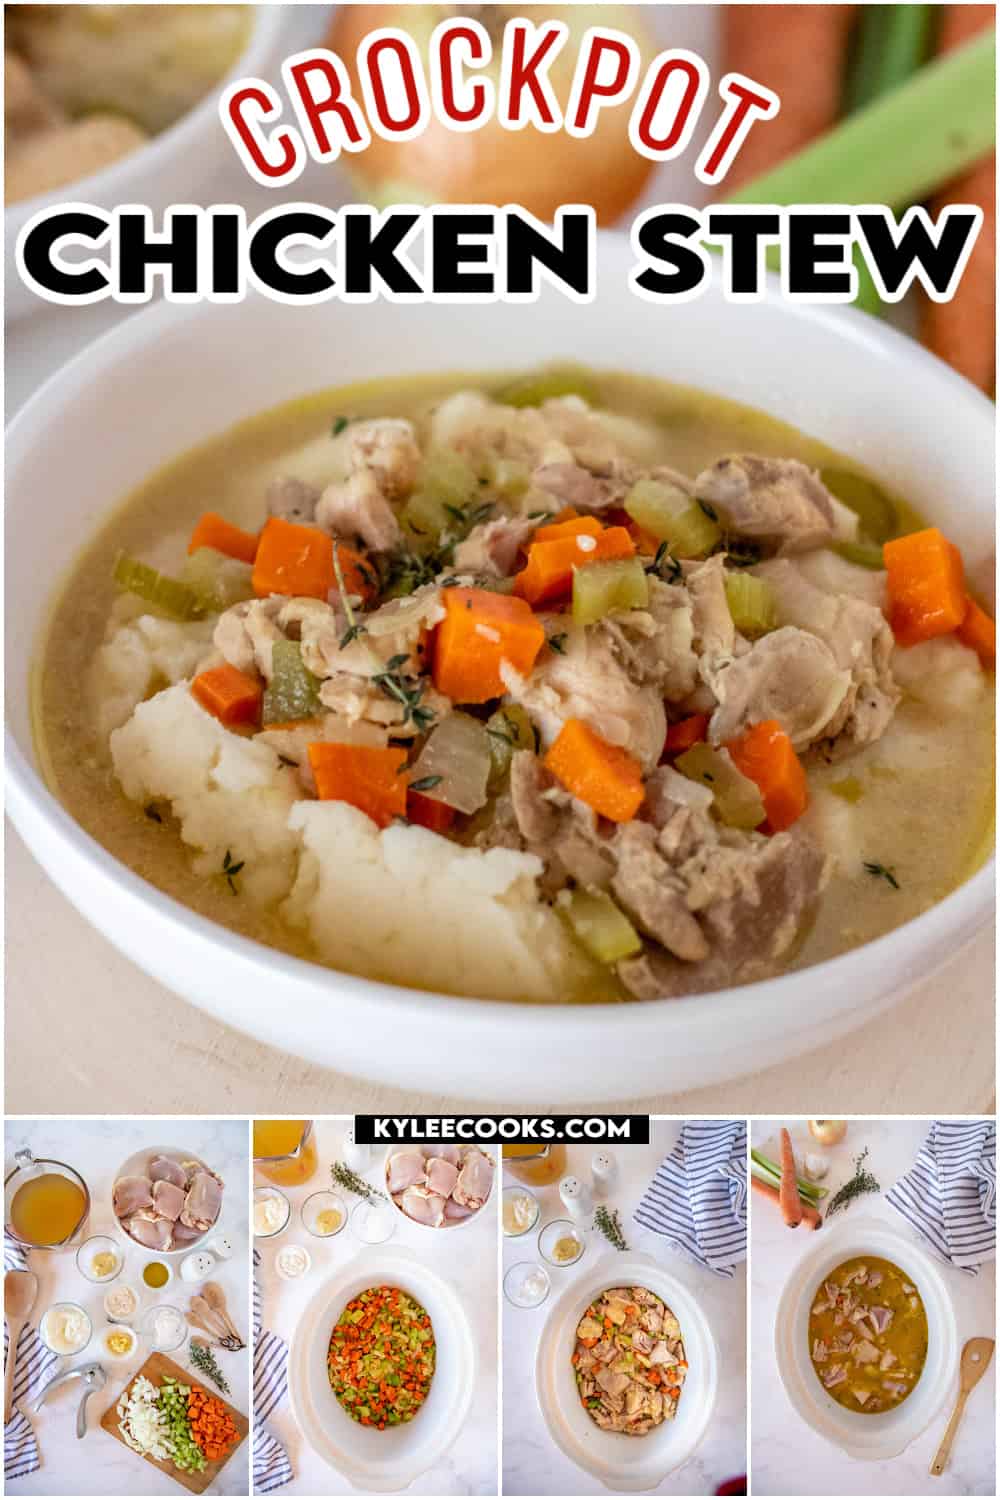 chicken stew in a white bowl with recipe name and ingredients overlaid in text.